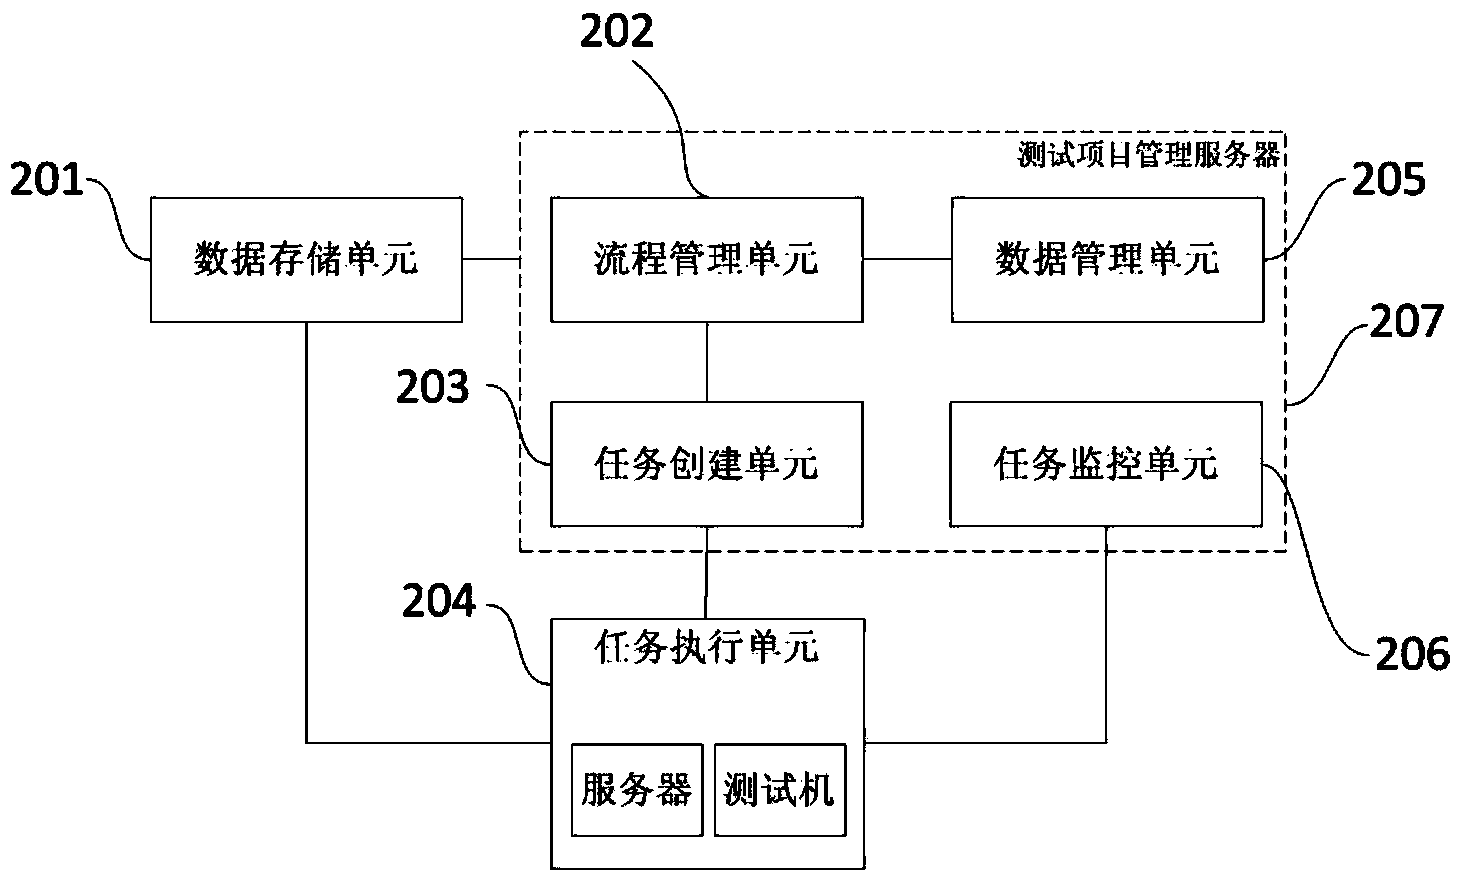 Application program testing method and system based on service process control